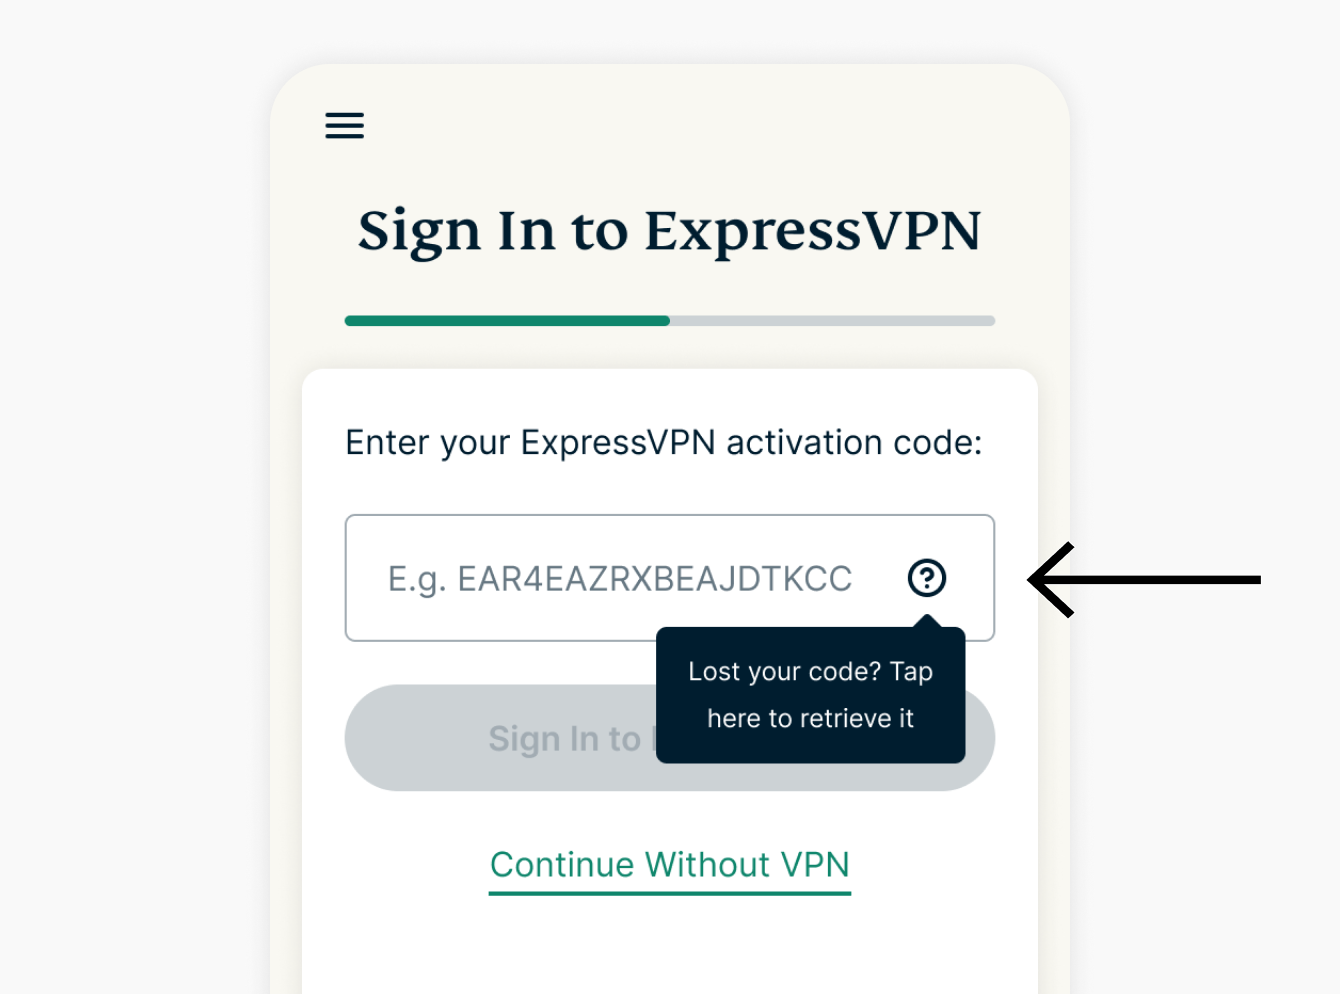 sign in to expressvpn screen with activation code entered